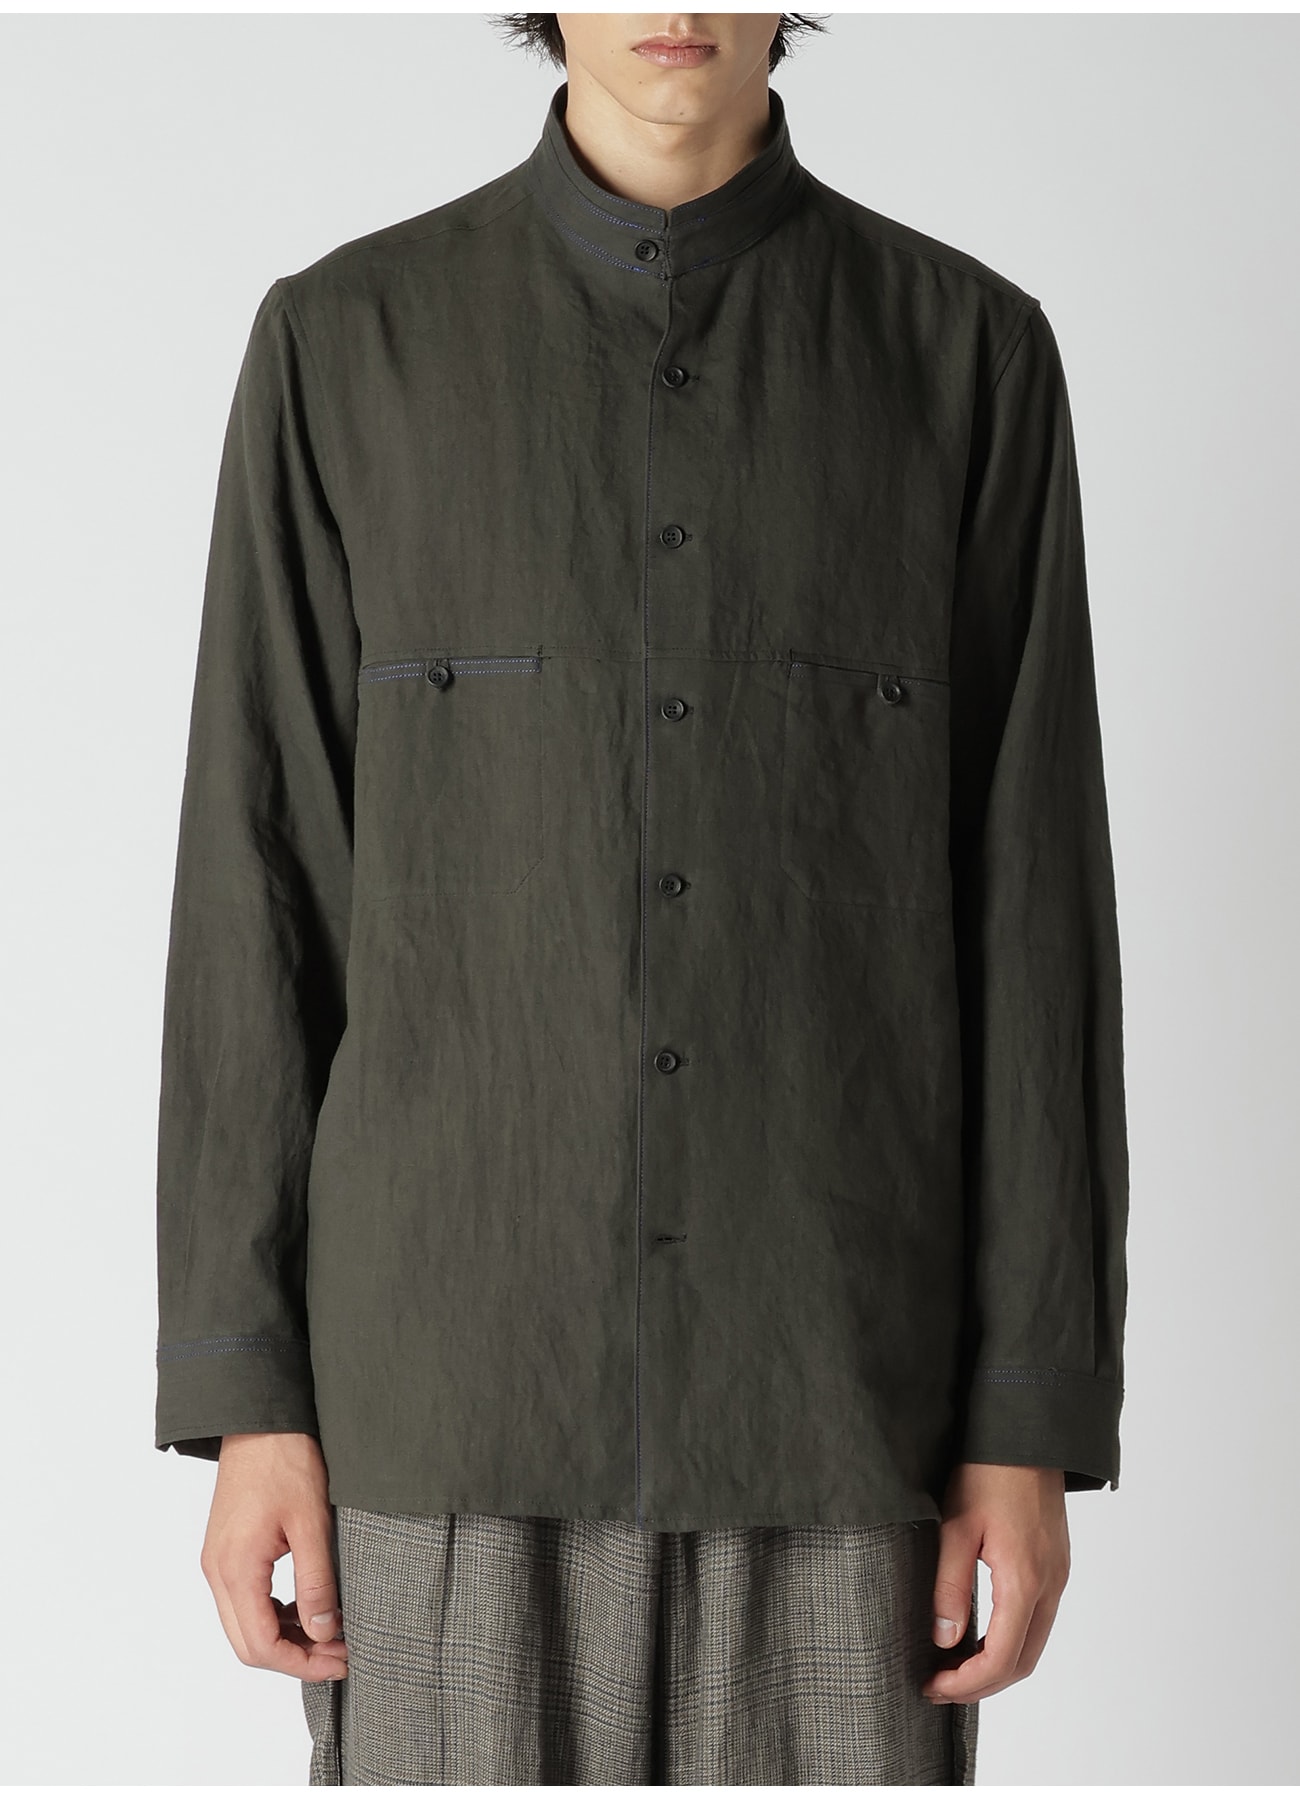 LINEN PAPER BROAD SHIRT WITH STAND COLLAR(S Black): Y's for men